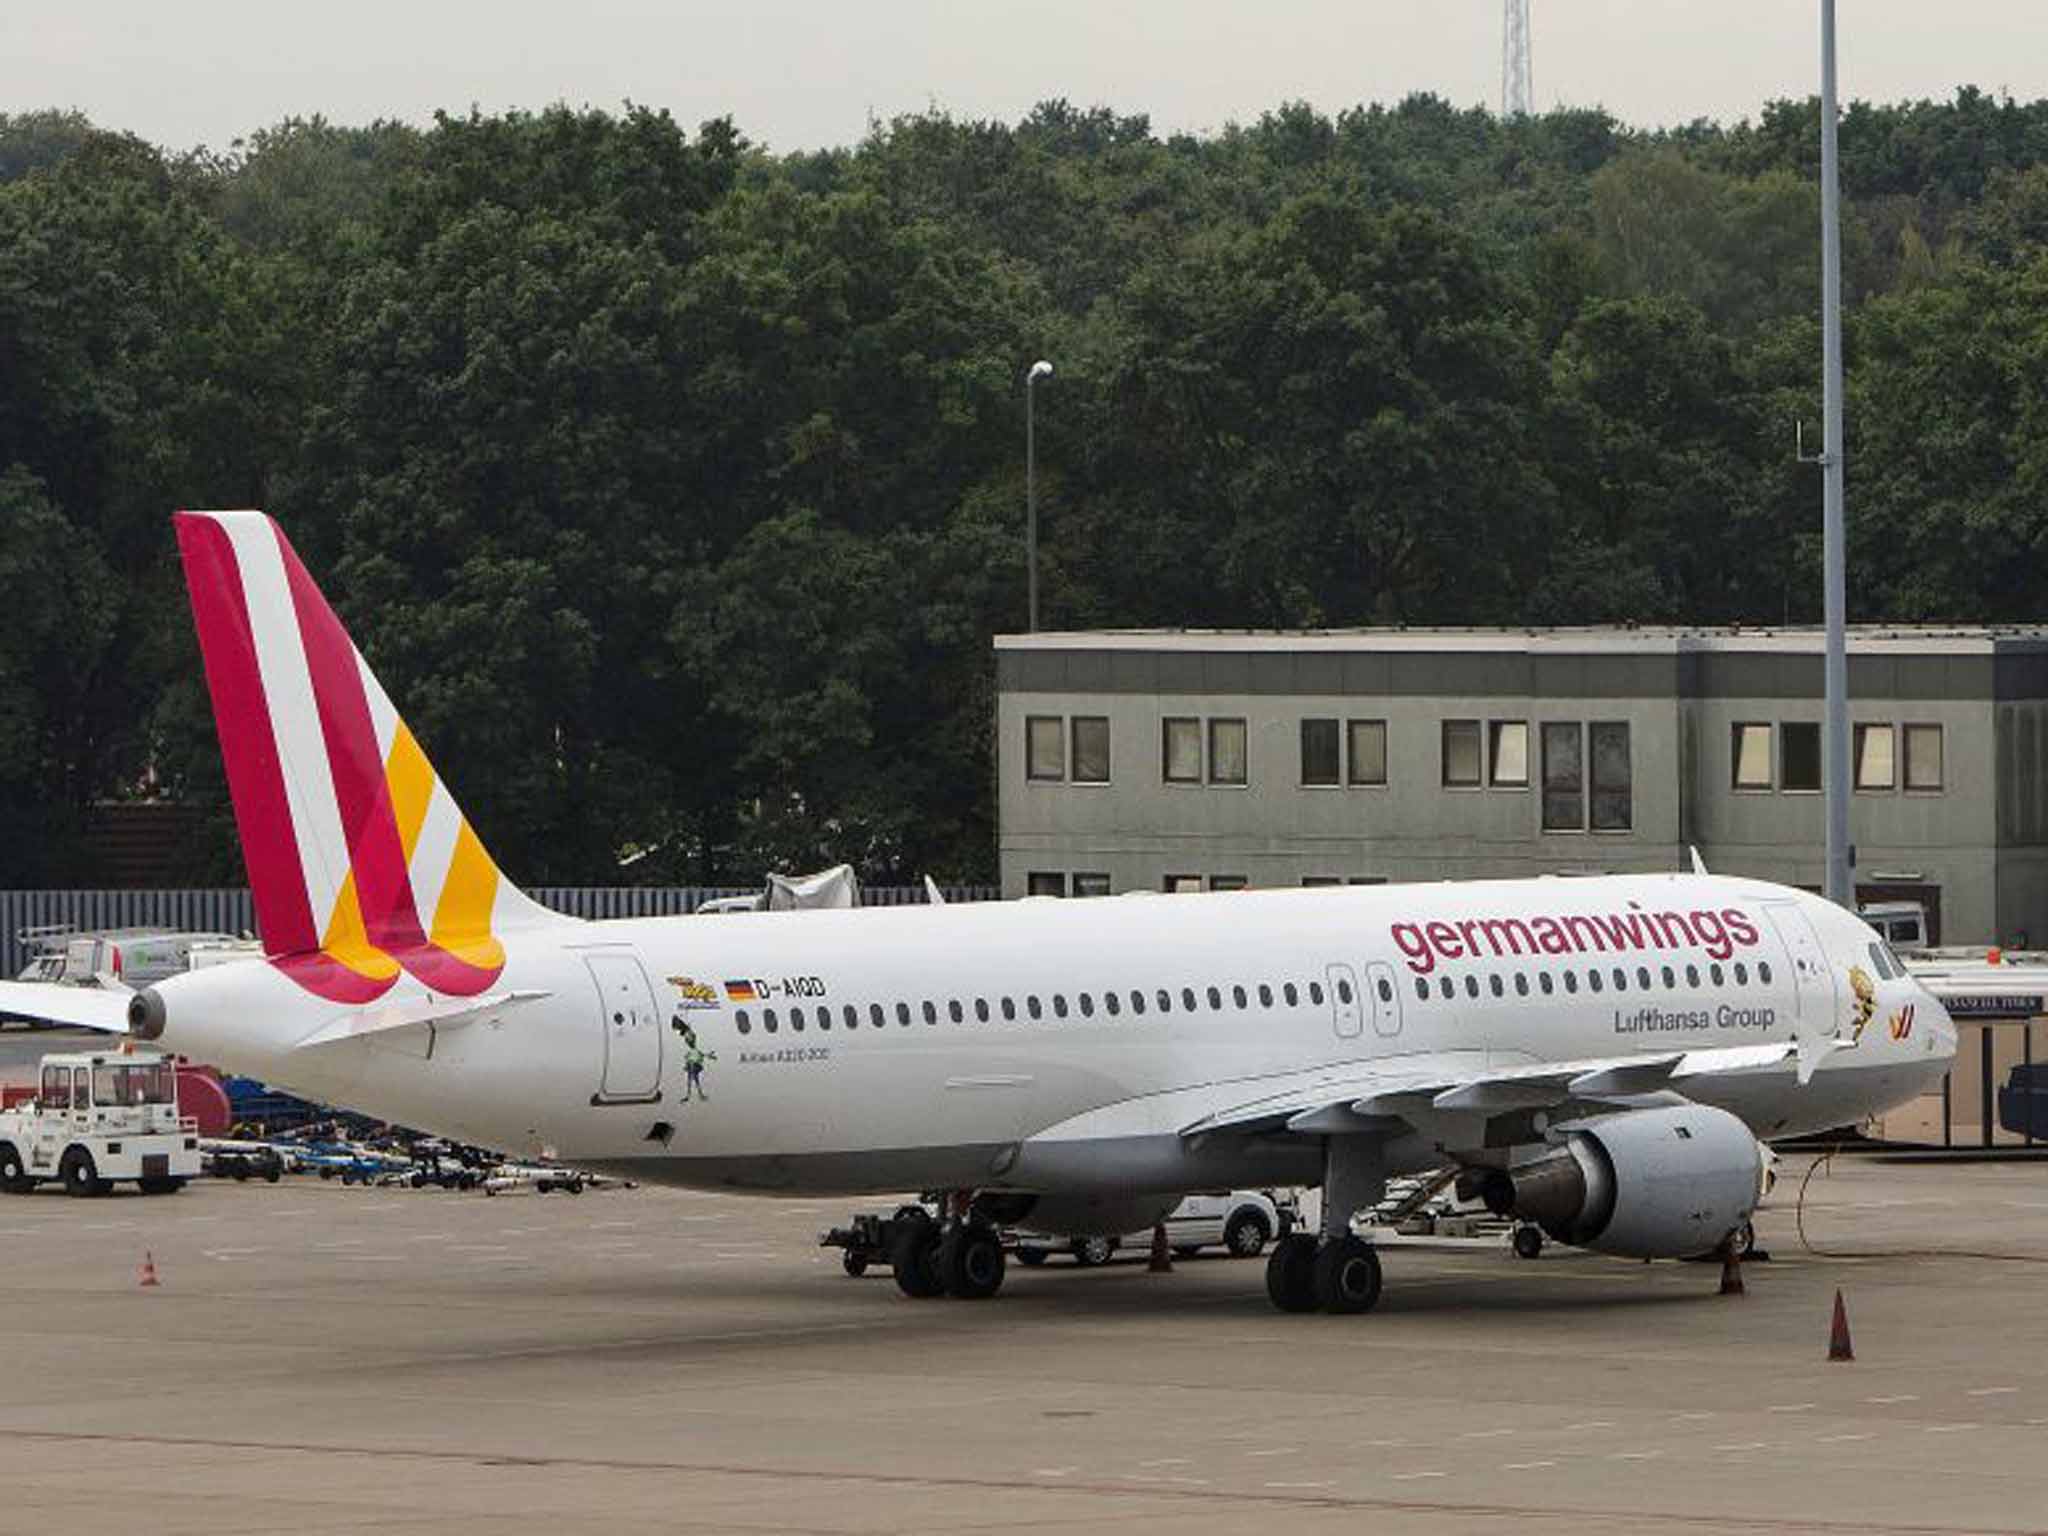 A Germanwings flight to Venice has been diverted to Stuttgart after the Airbus A319 aircraft appeared to be losing oil